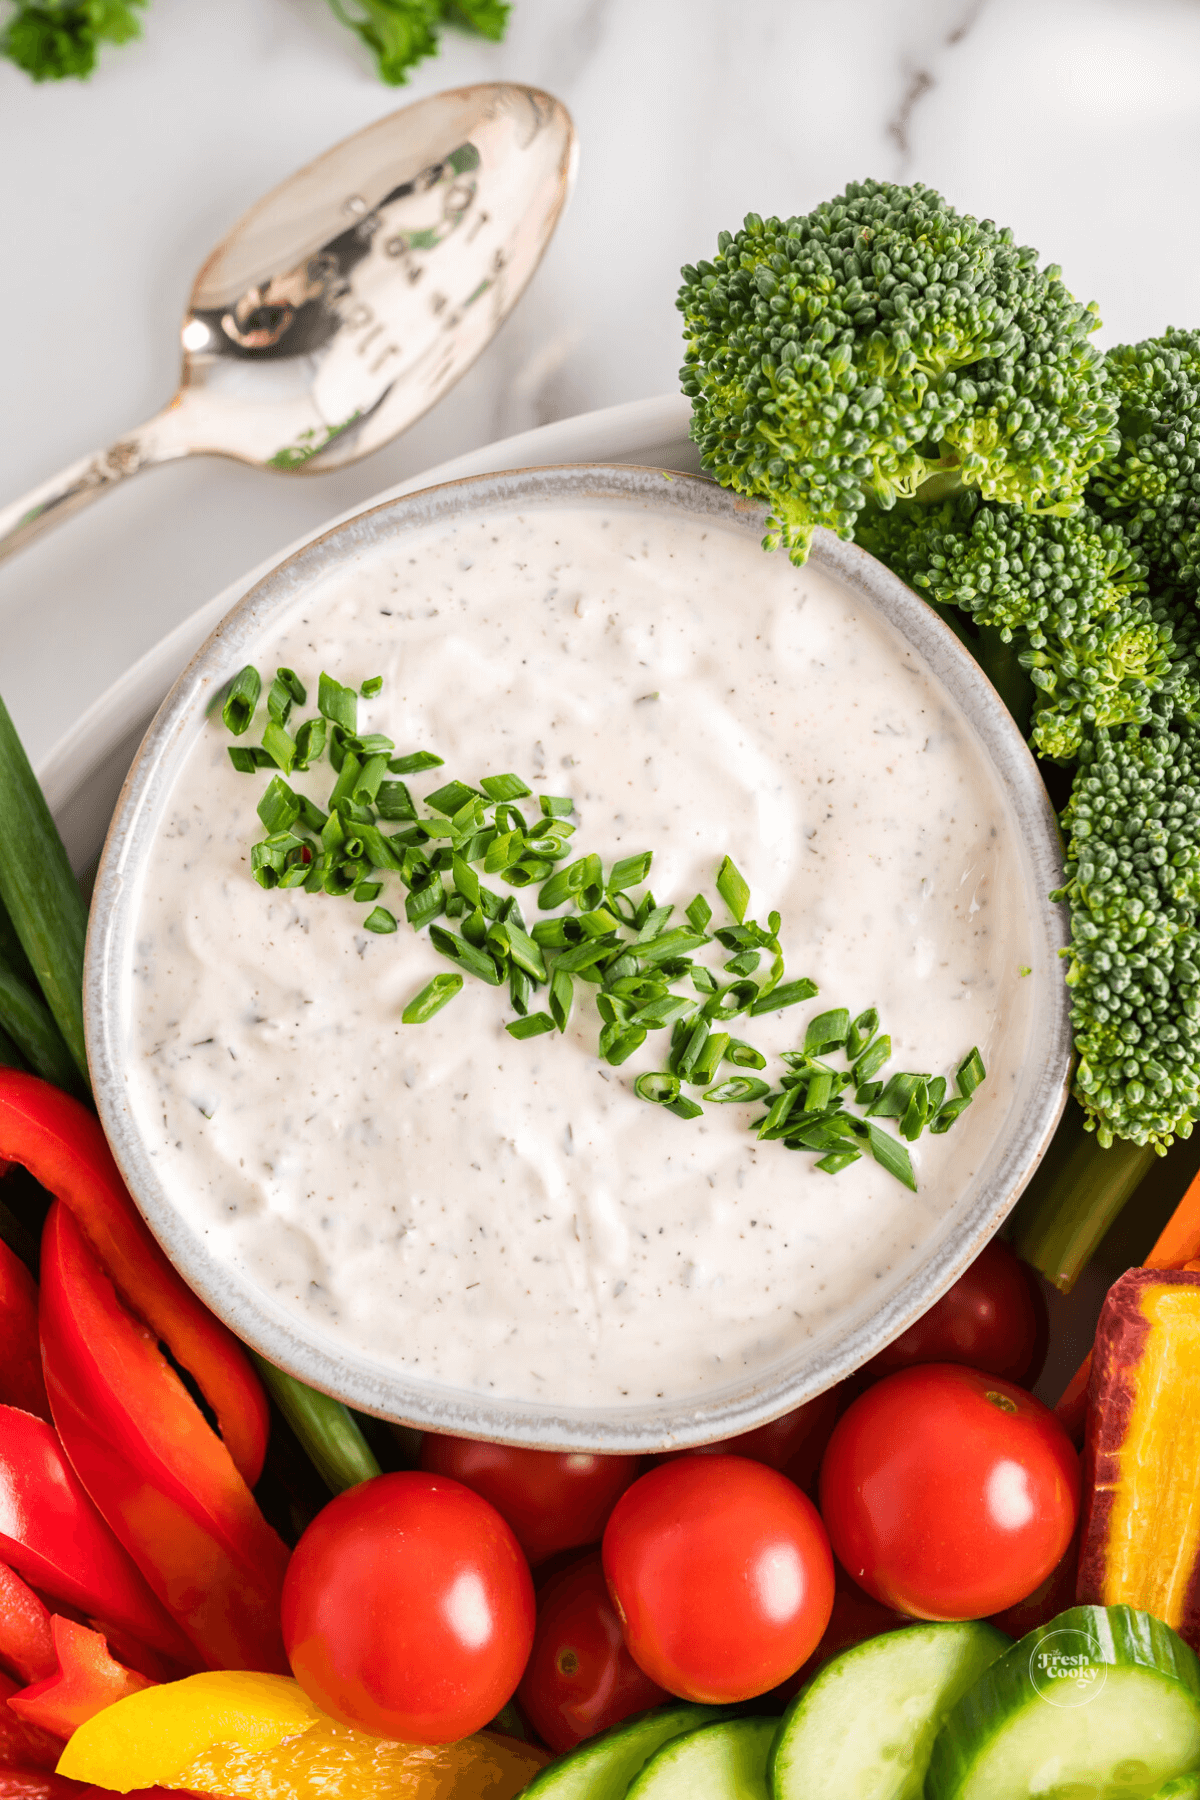 Lovely veggie dip in rustic bowl garnished with chopped chives with fresh veggies surrounding the dip.